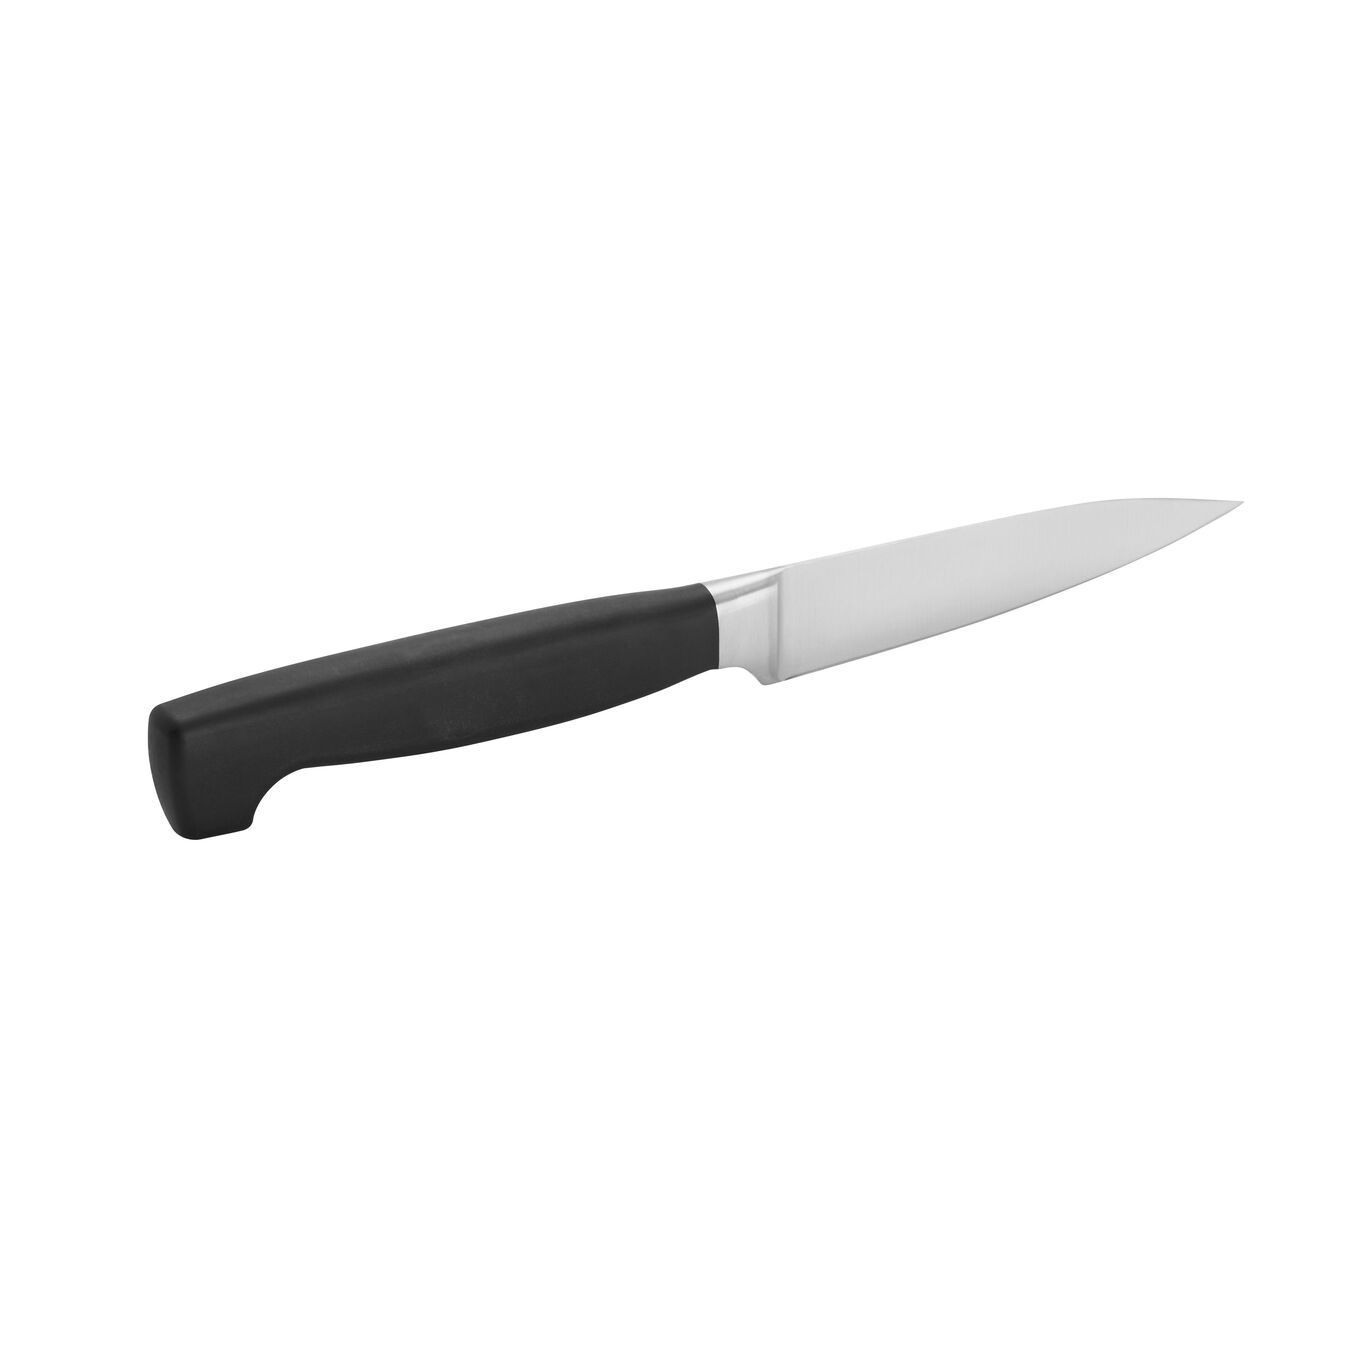 4-inch, Paring knife - Visual Imperfections,,large 4